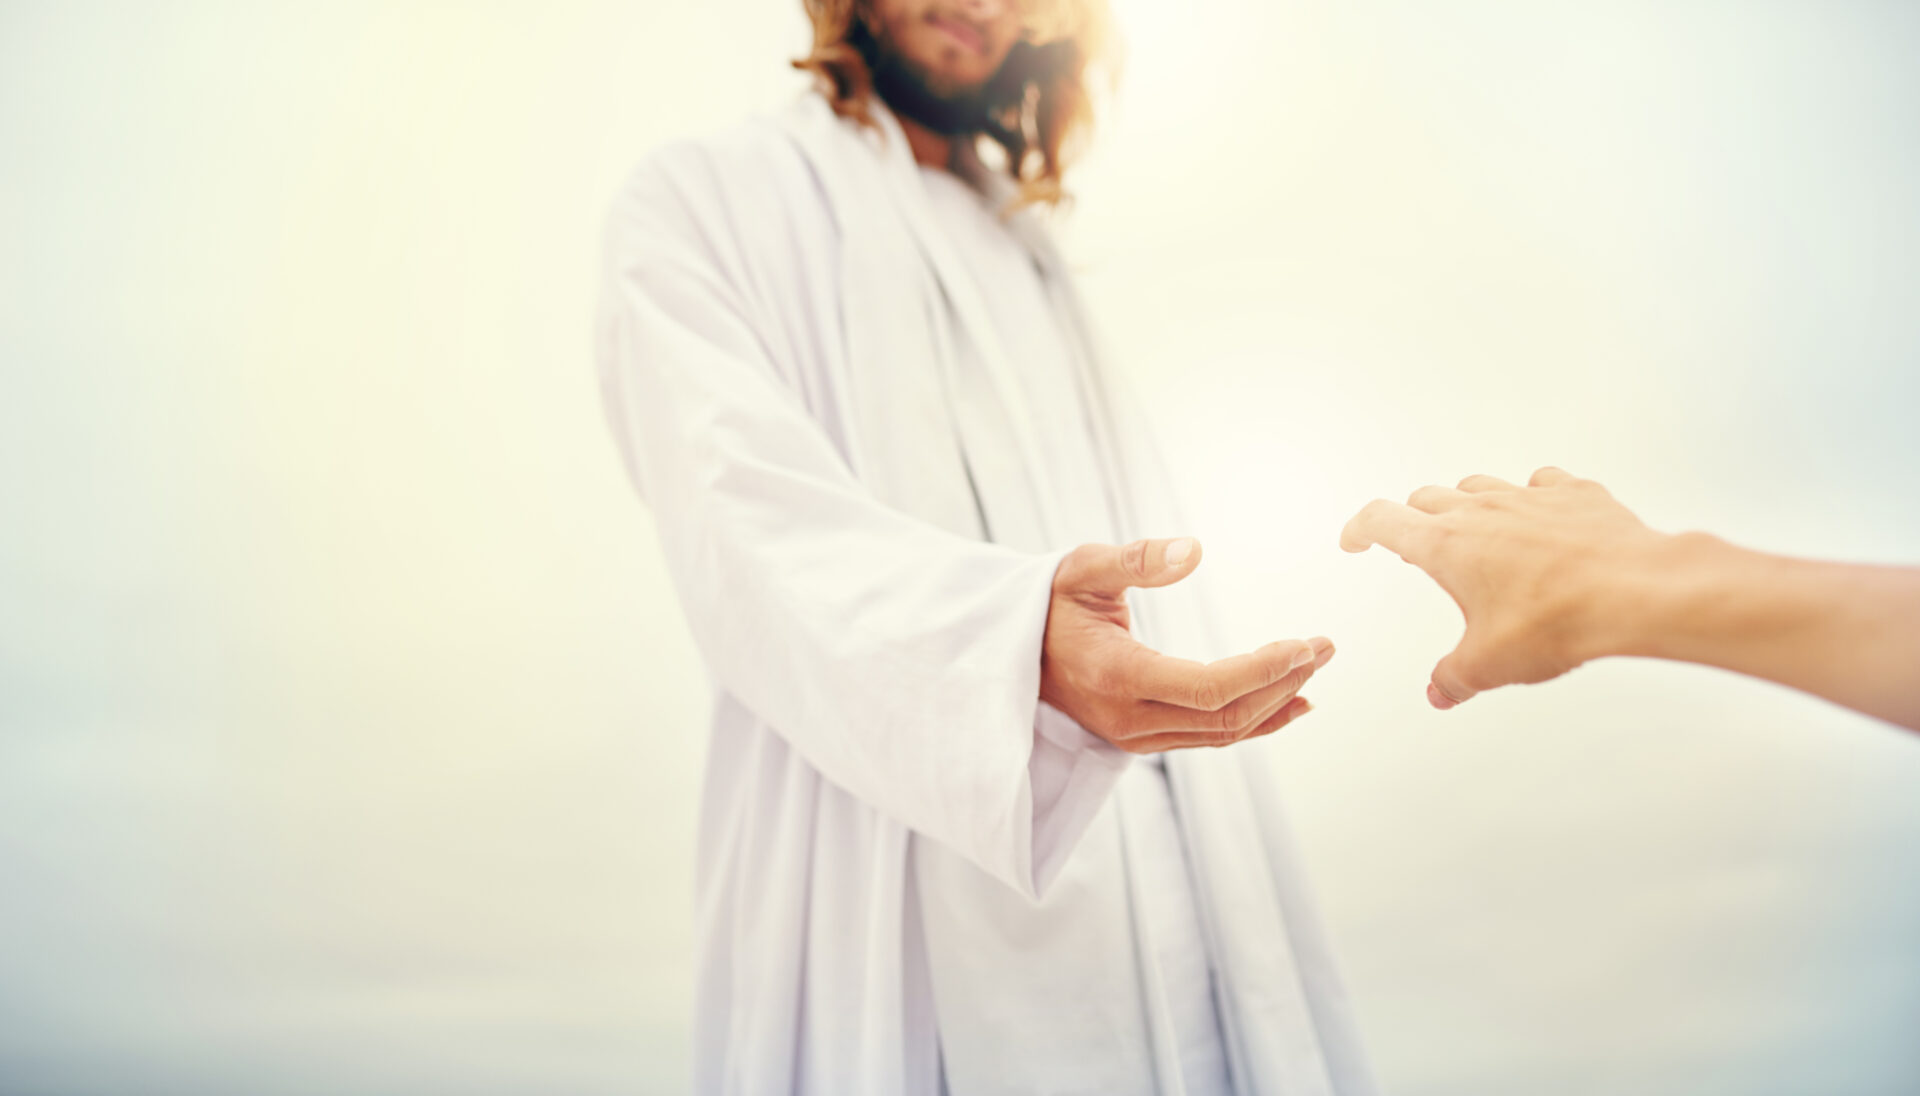 Shot of Jesus standing with his hand outstretched toward a follower on a bare landscape